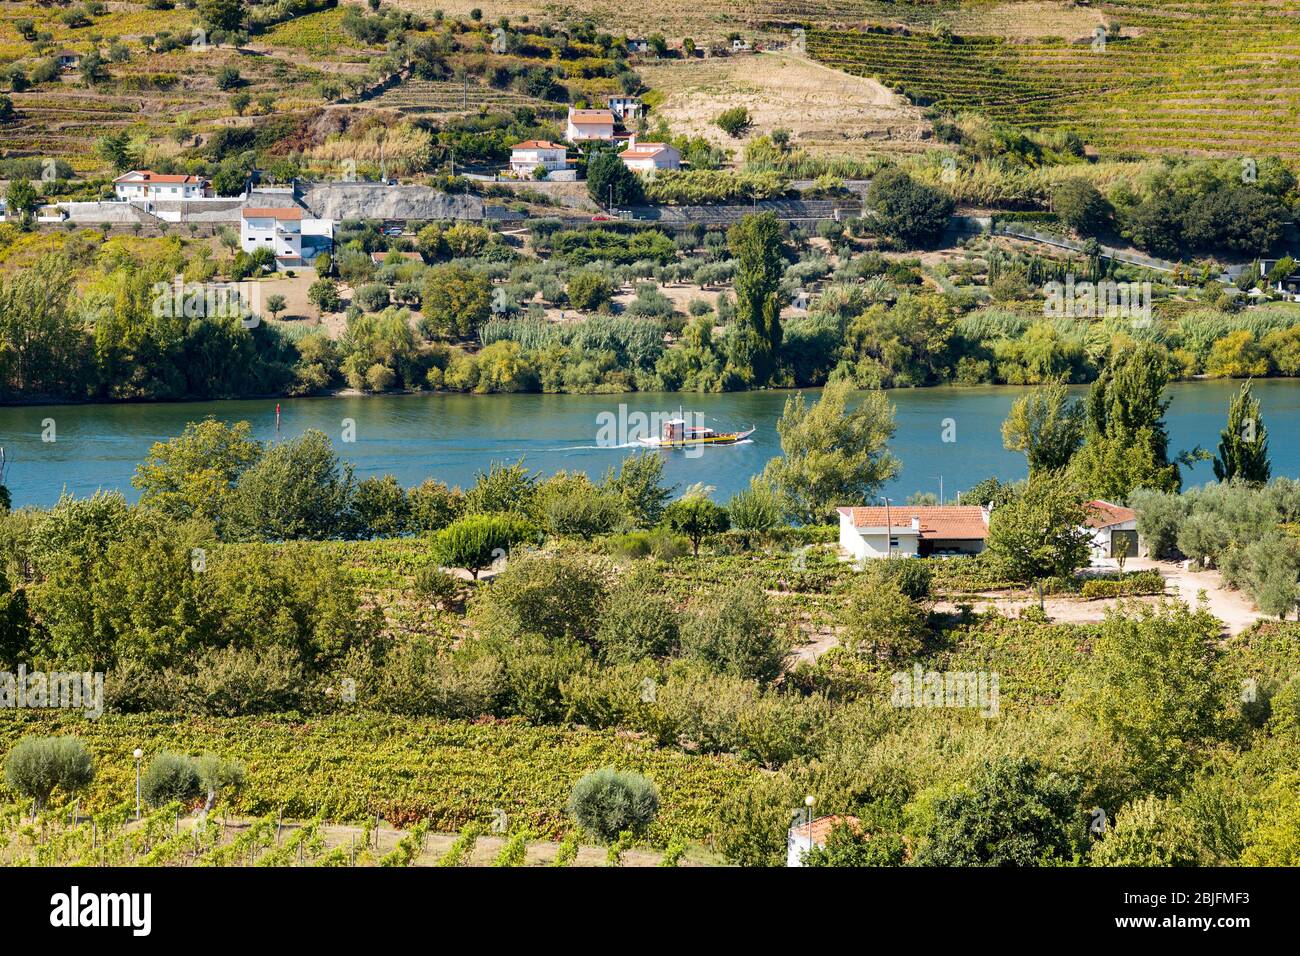 Rabelo port wine boat passing vineyards on the verdant green hill slopes and banks of the River Douro region north of Viseu in Portugal Stock Photo